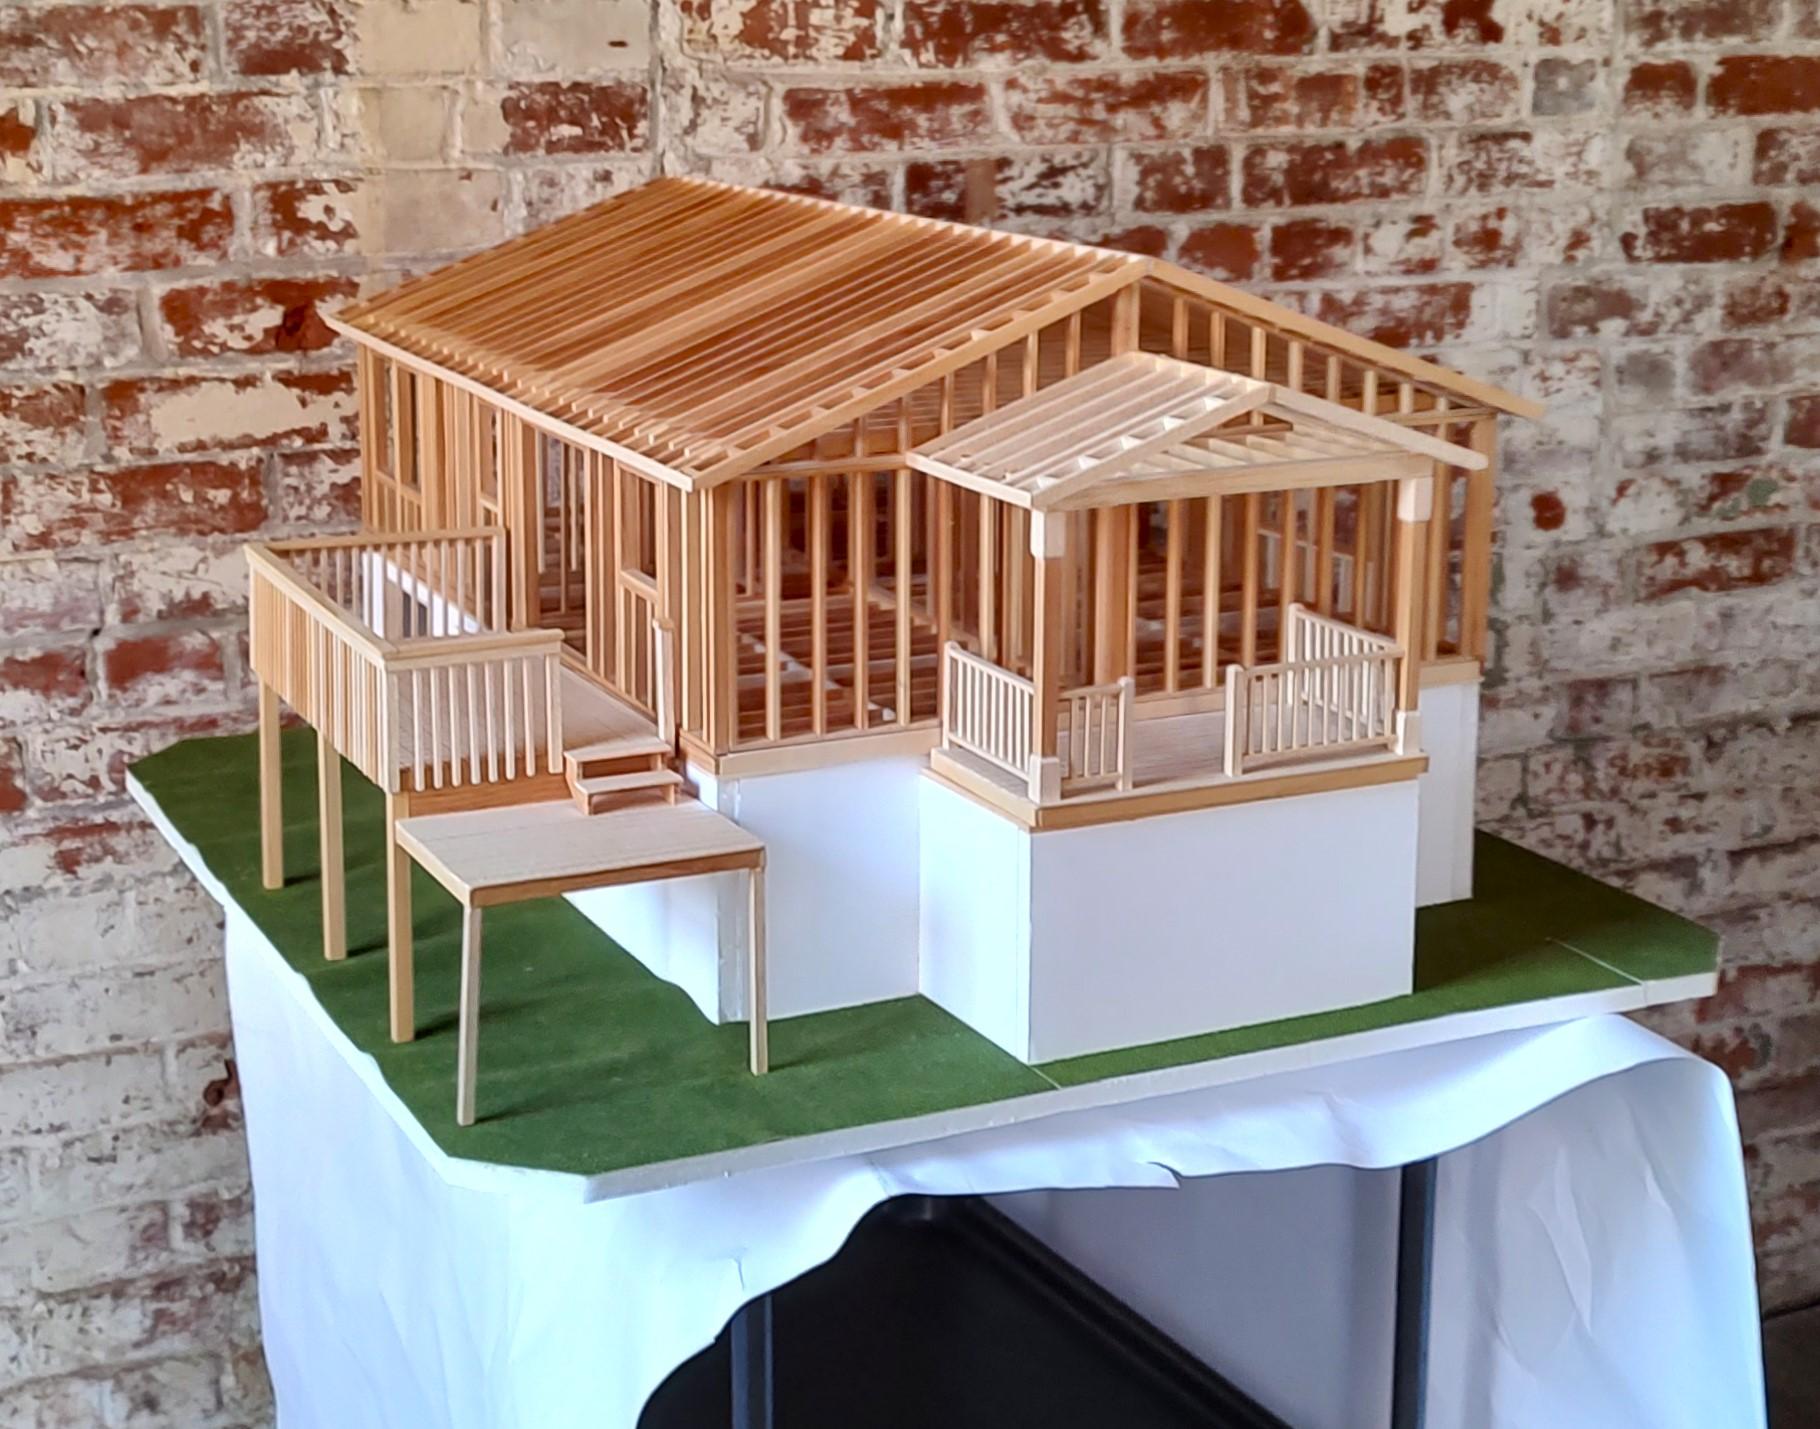 American Architectural Model of Timber Framed House